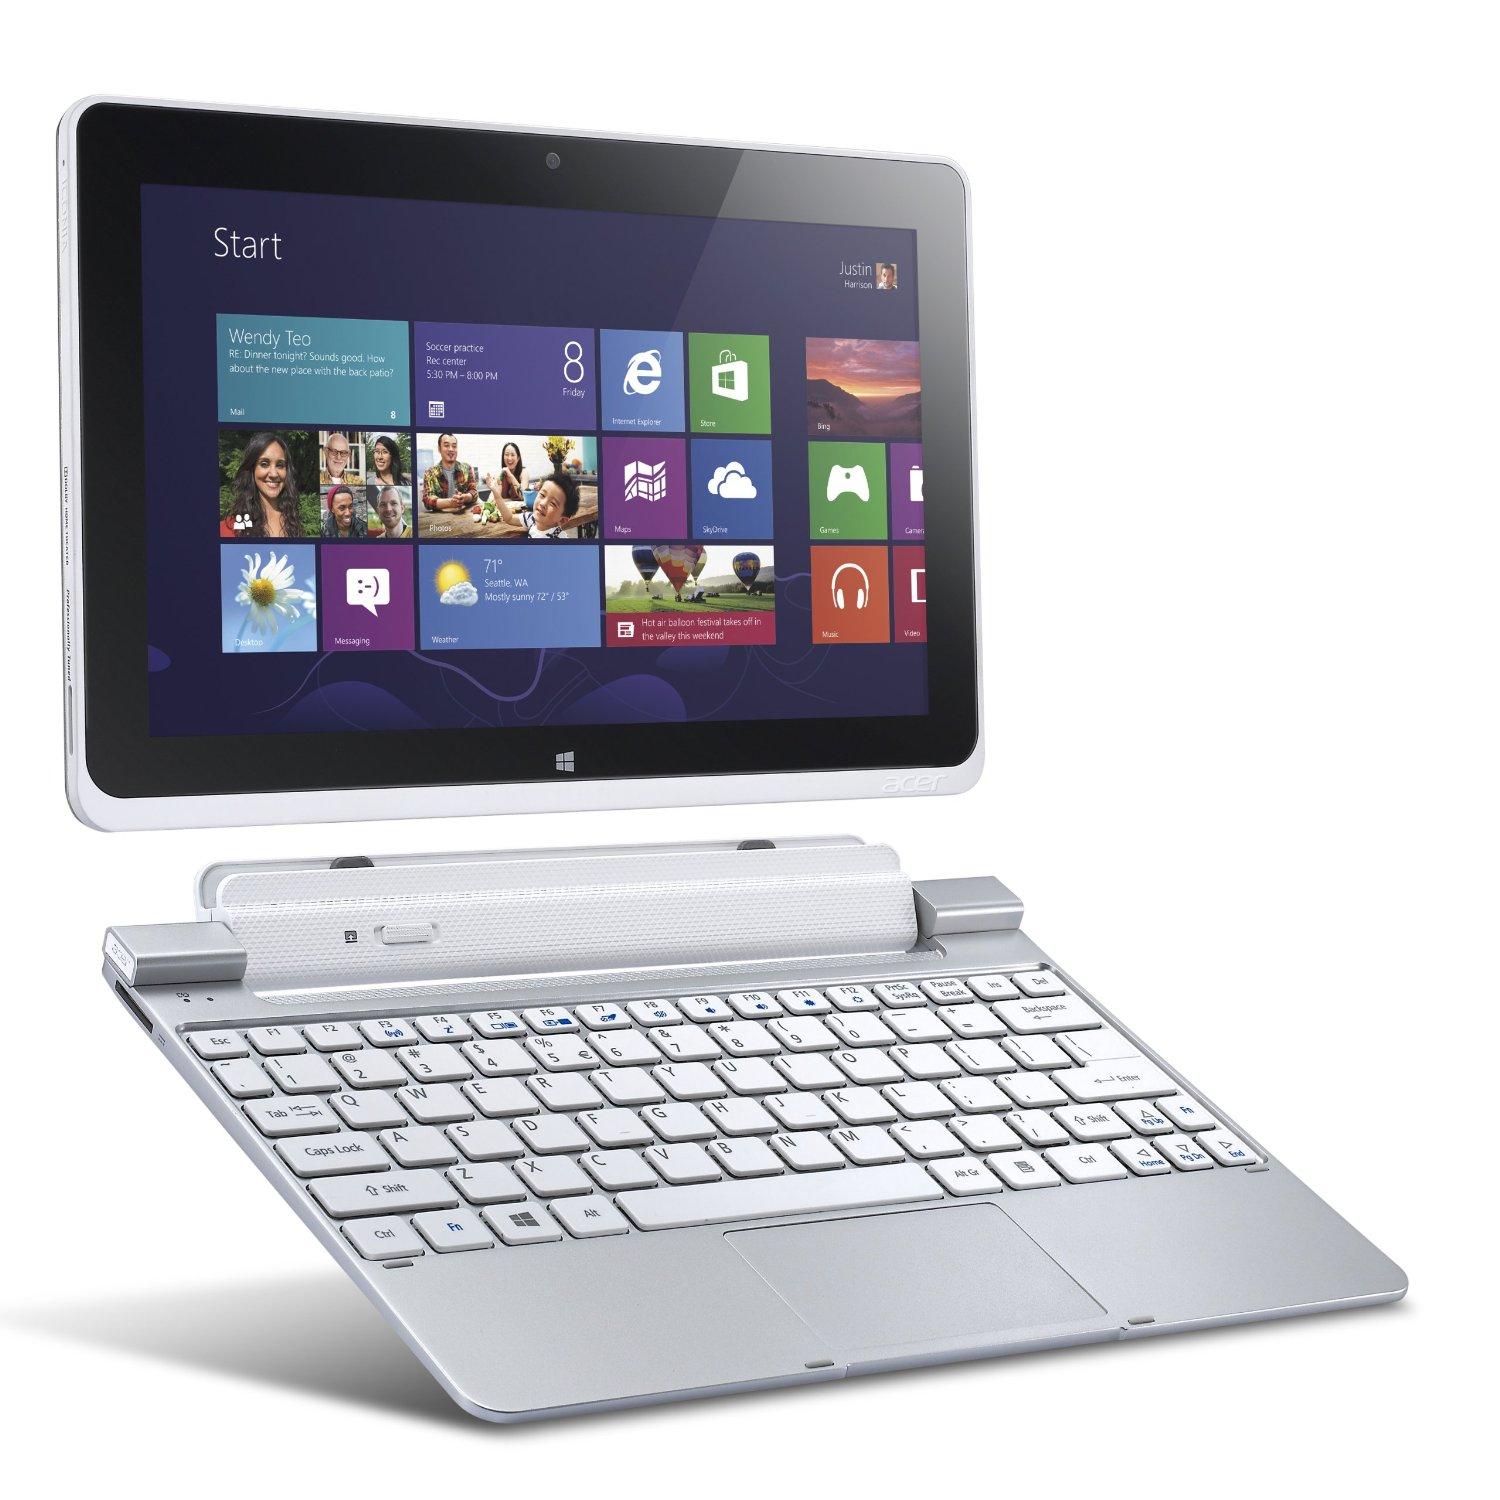 Acer Iconia W510.Foto: Acer